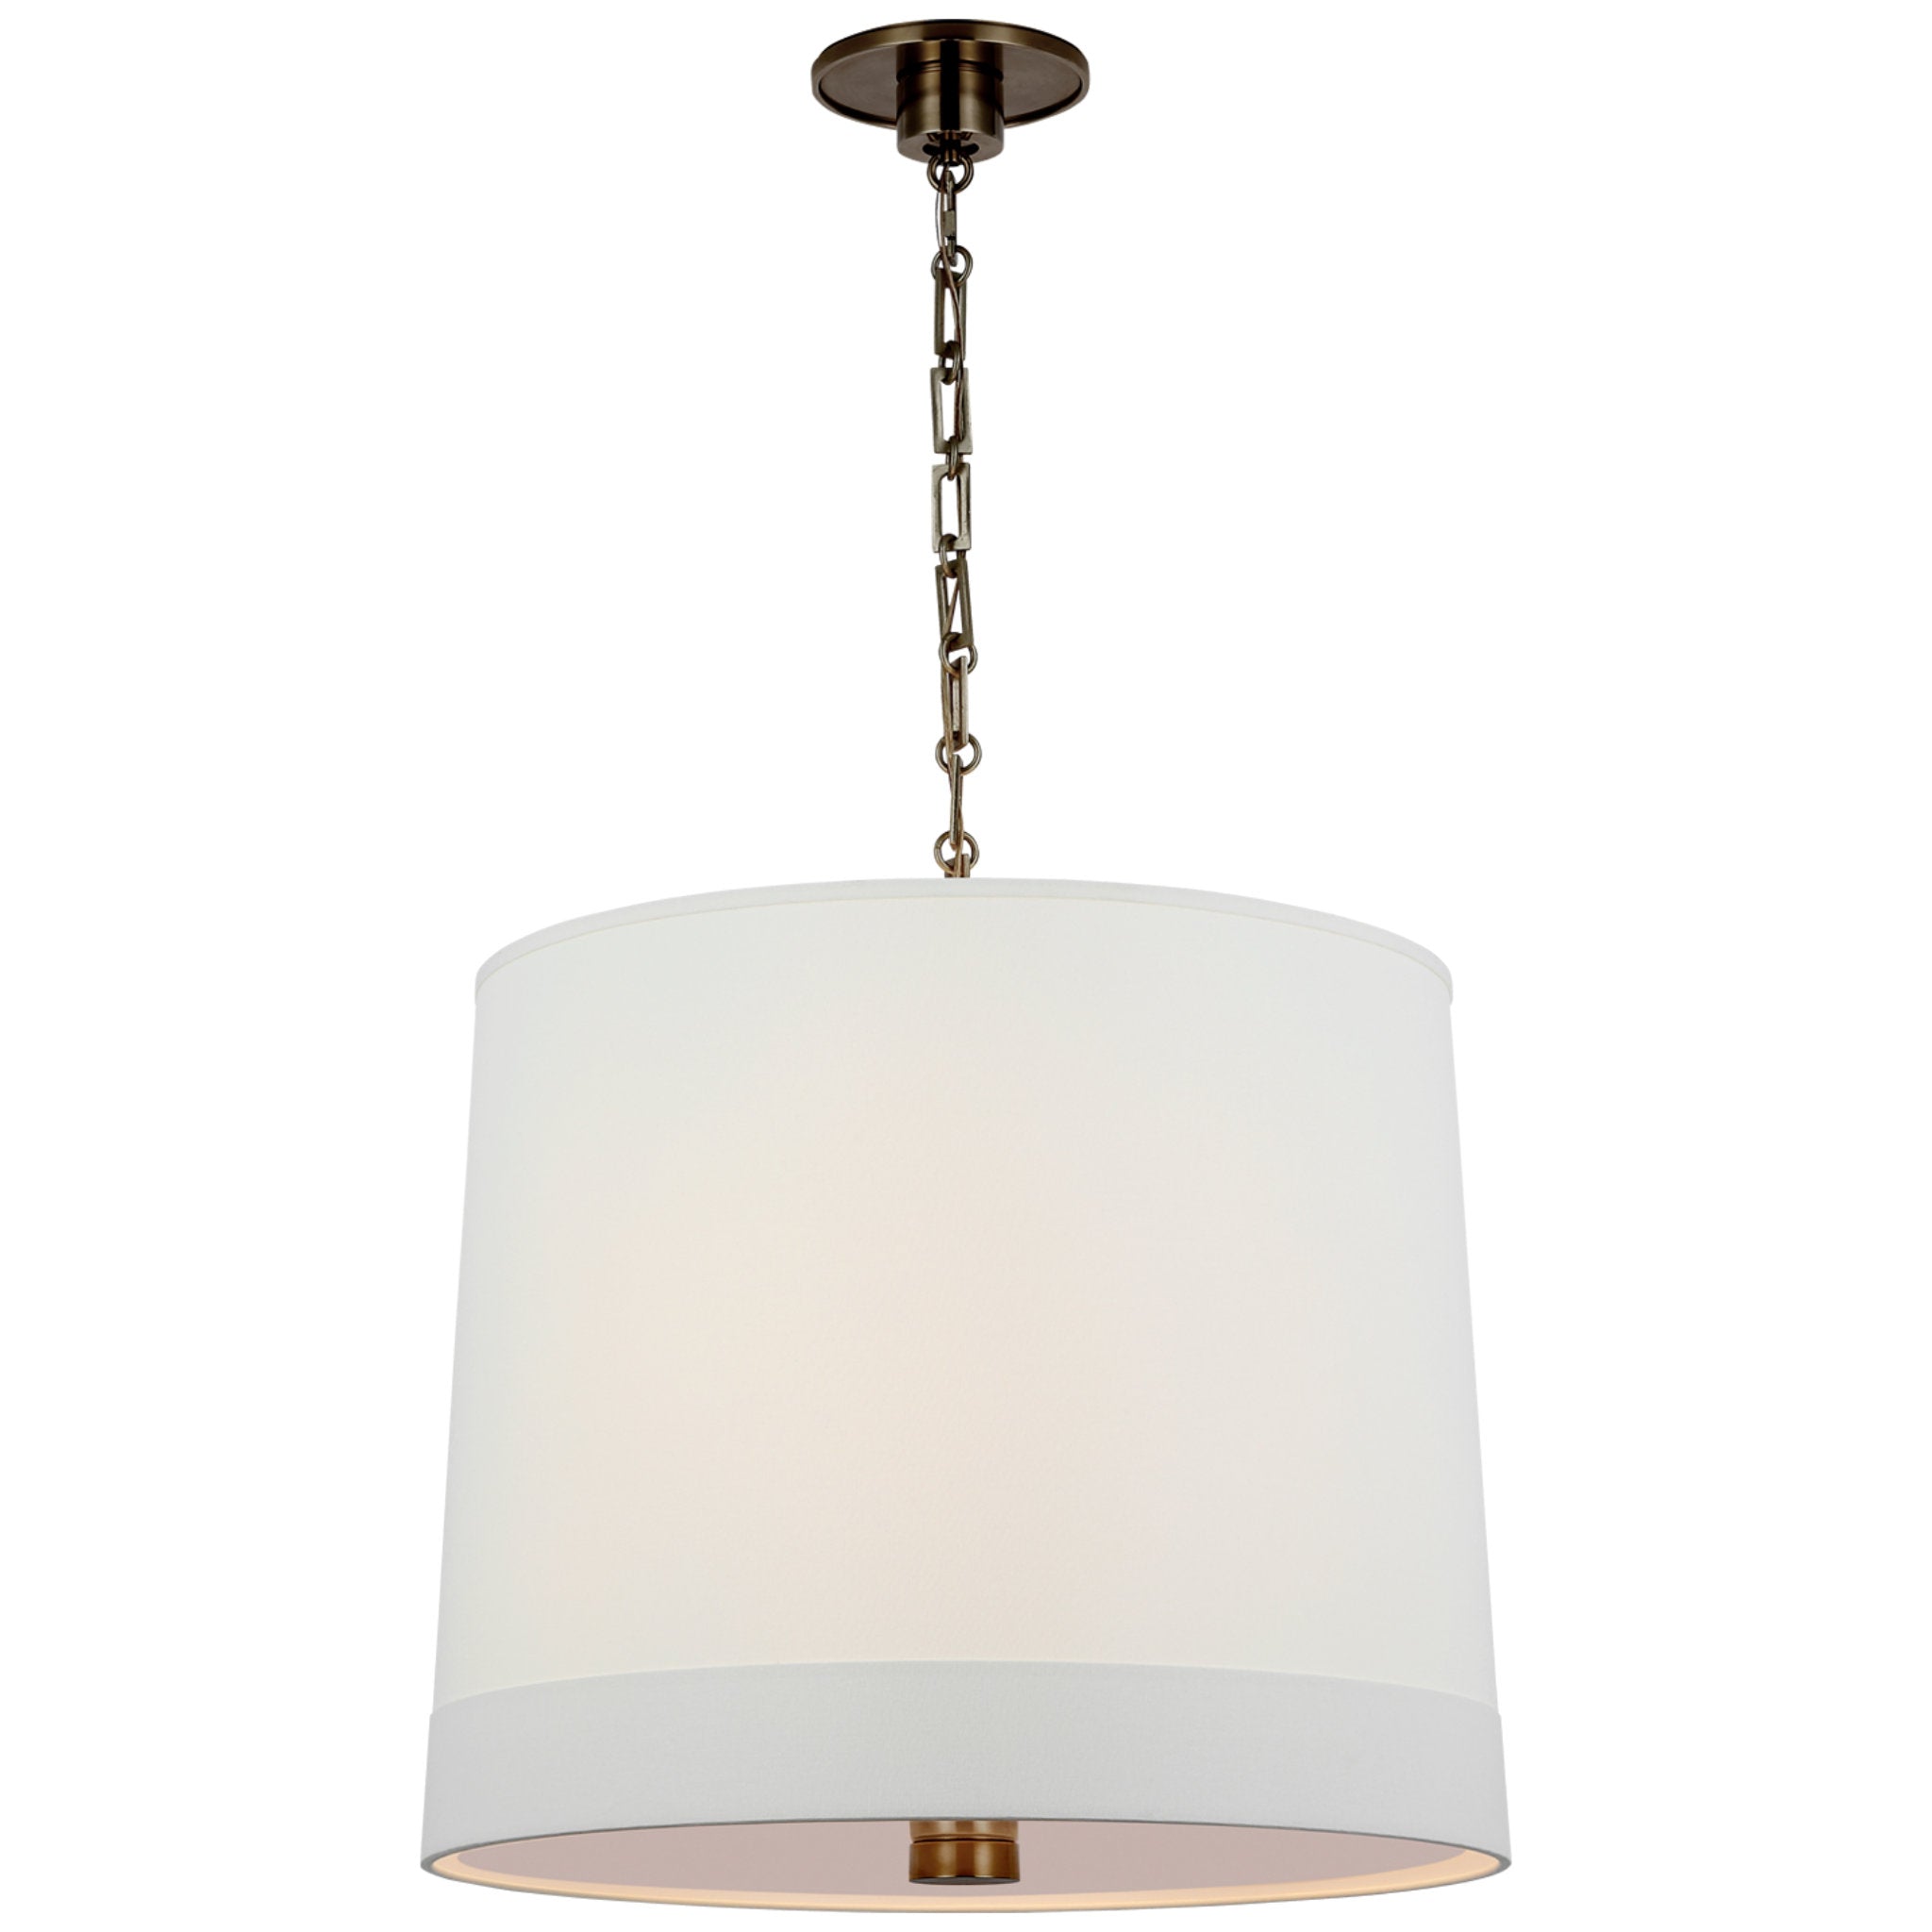 Barbara Barry Simple Hanging Shade in Bronze with Banded Linen Shade